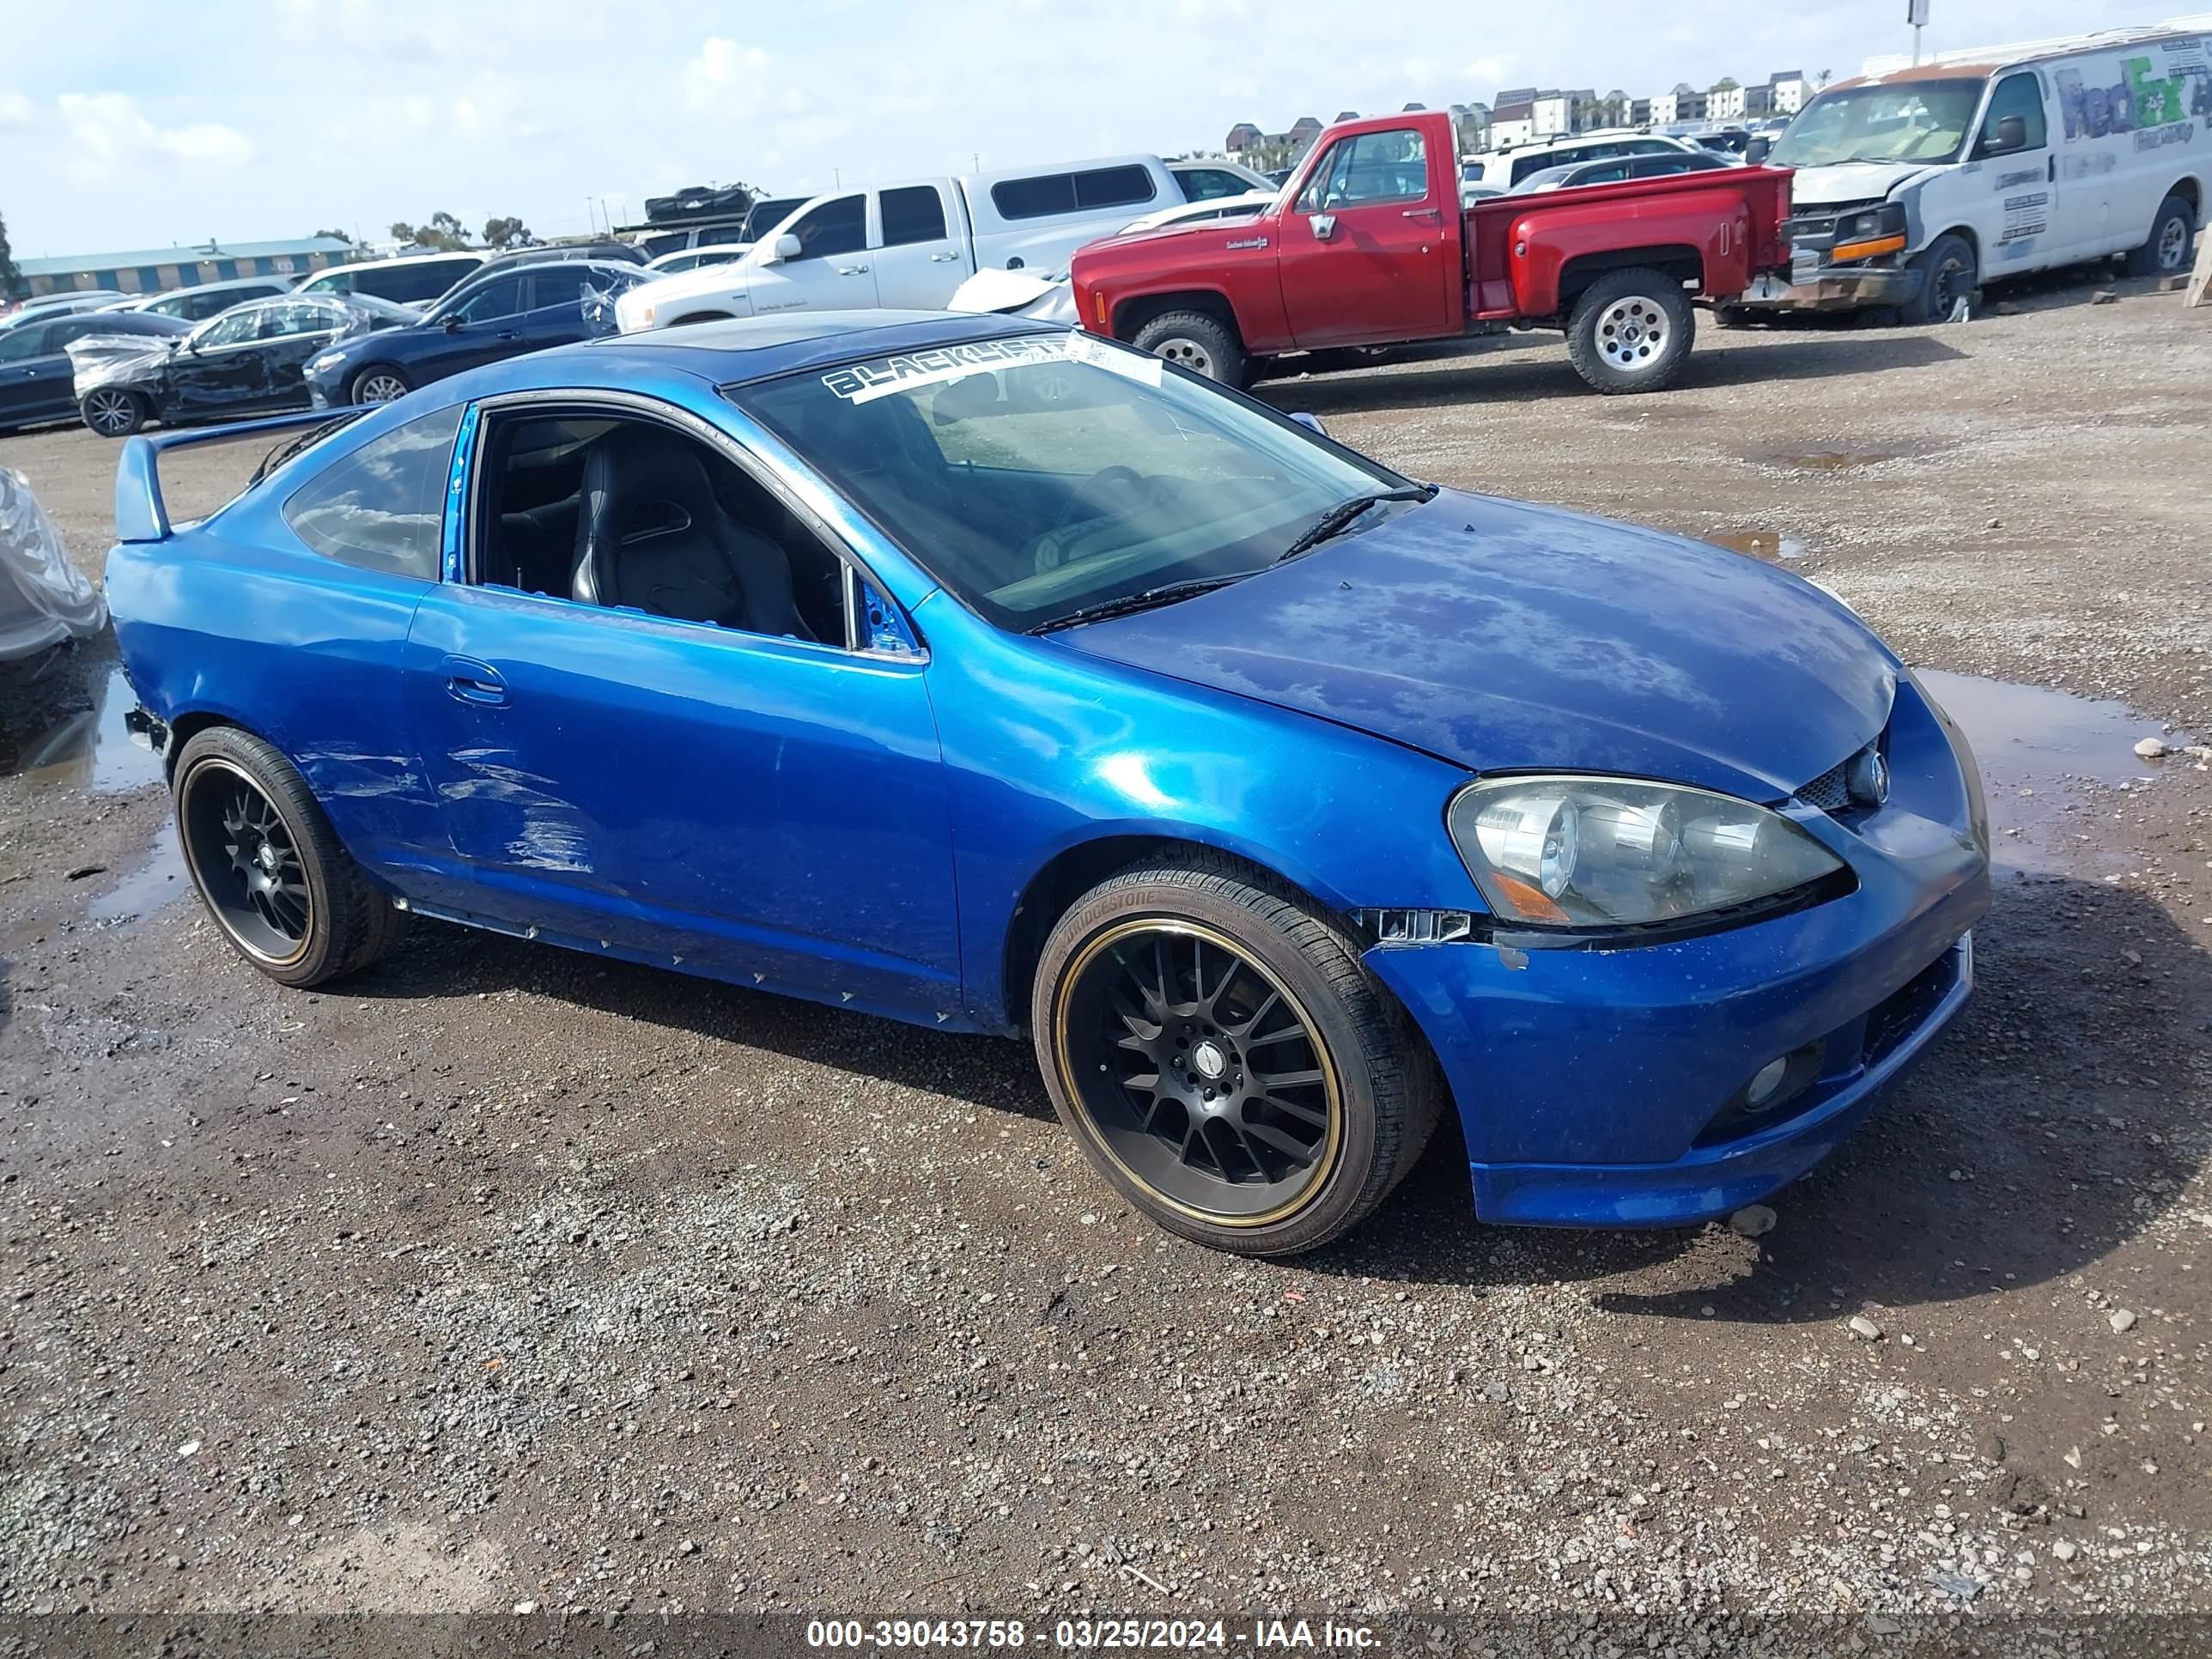 VIN: JH4DC54875S011125 - acura rsx